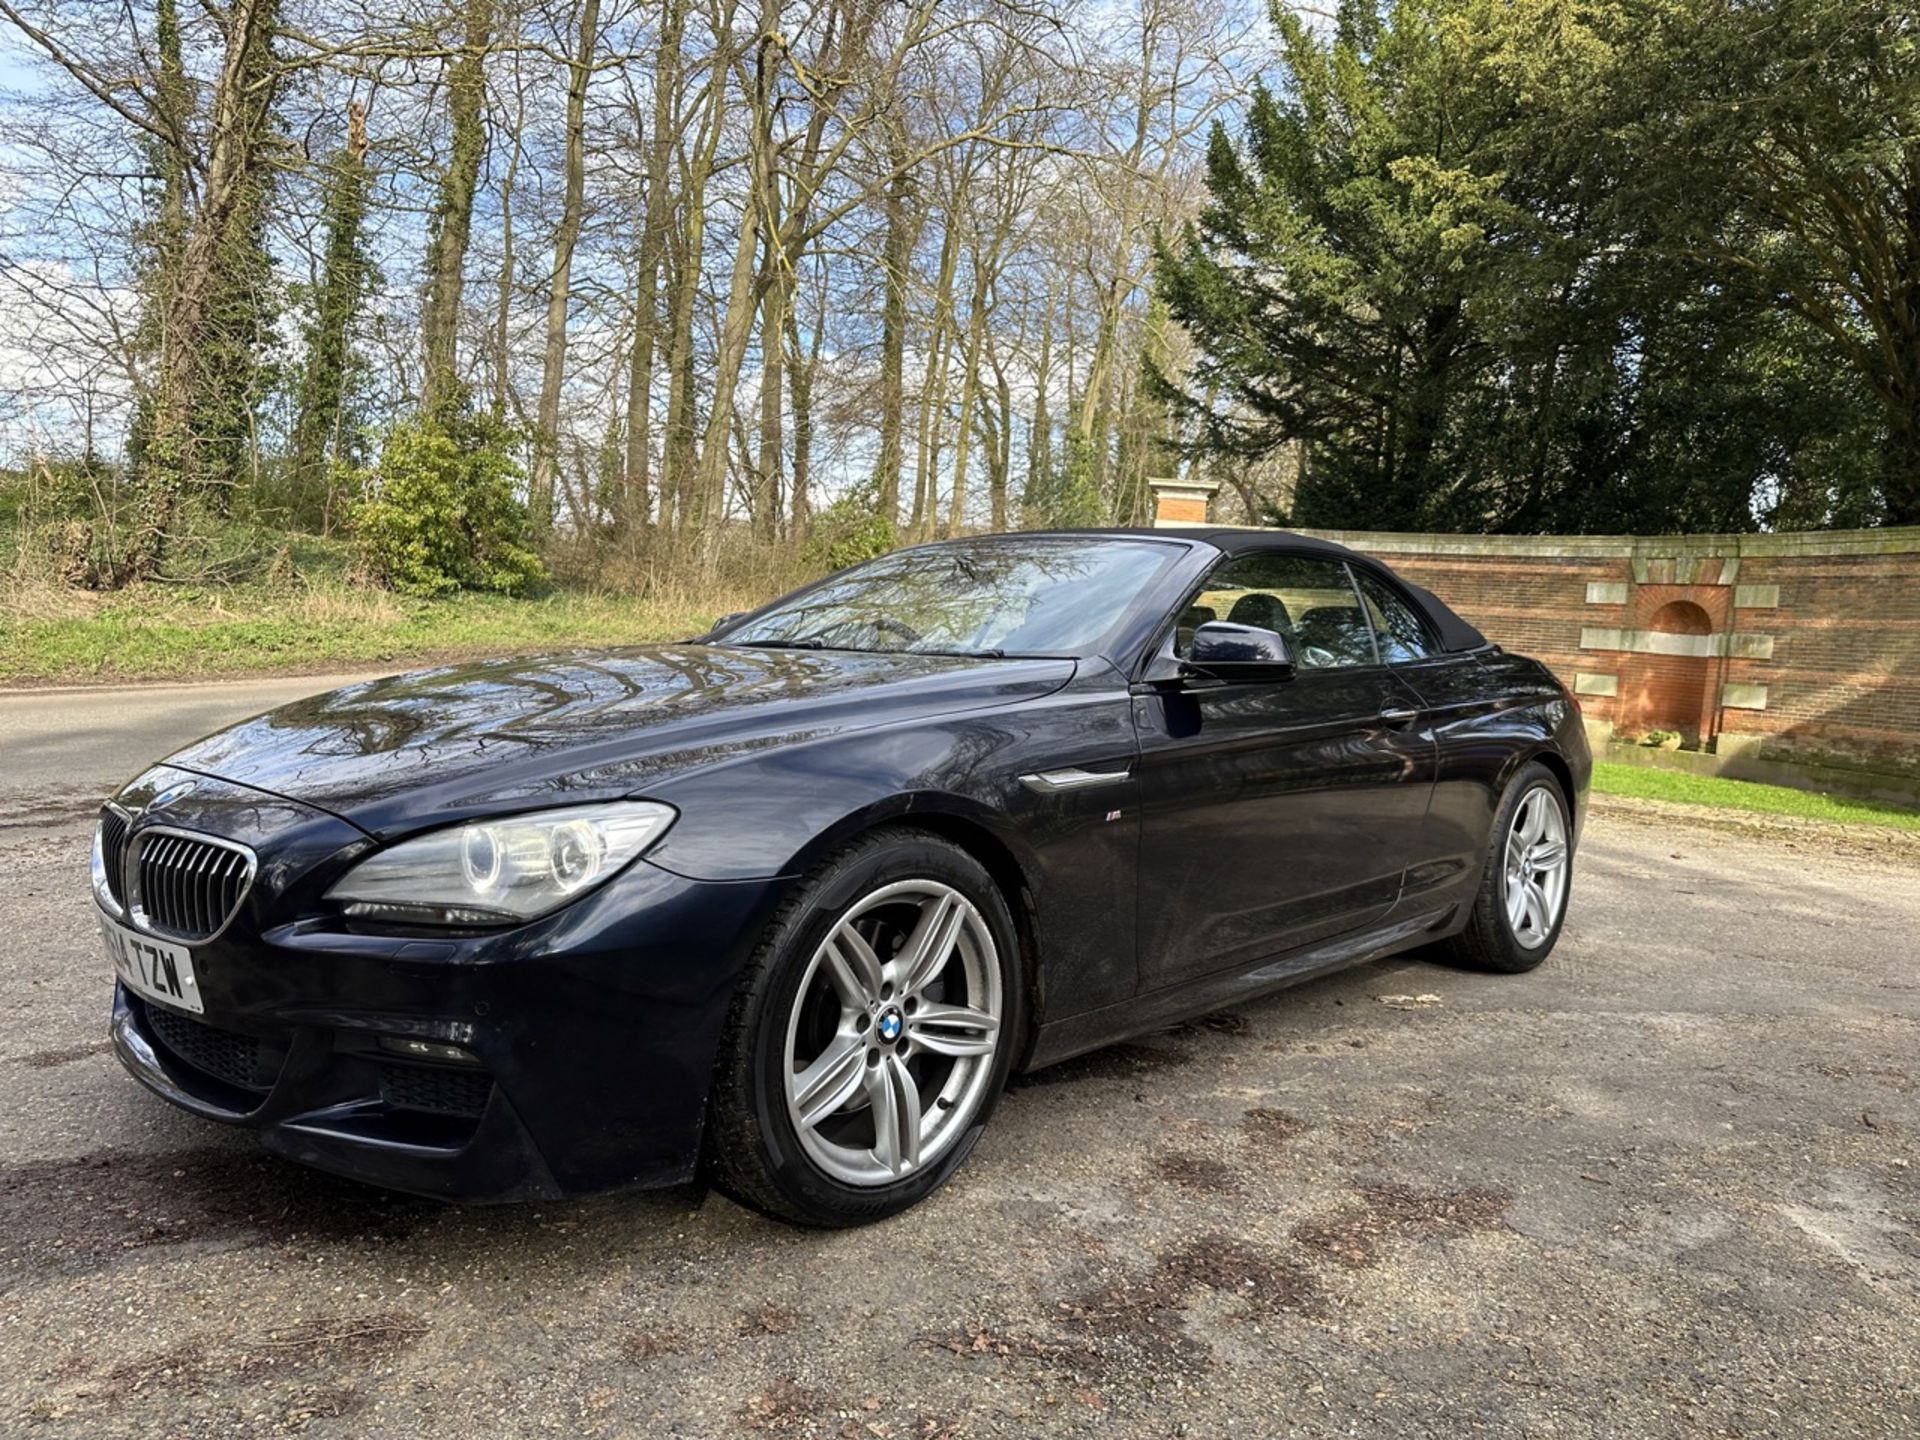 BMW 6 SERIES 640d (M SPORT) Ultimate Summer Car - AUTOMATIC - Convertible - 2014 - 3L Diesel - Image 4 of 18